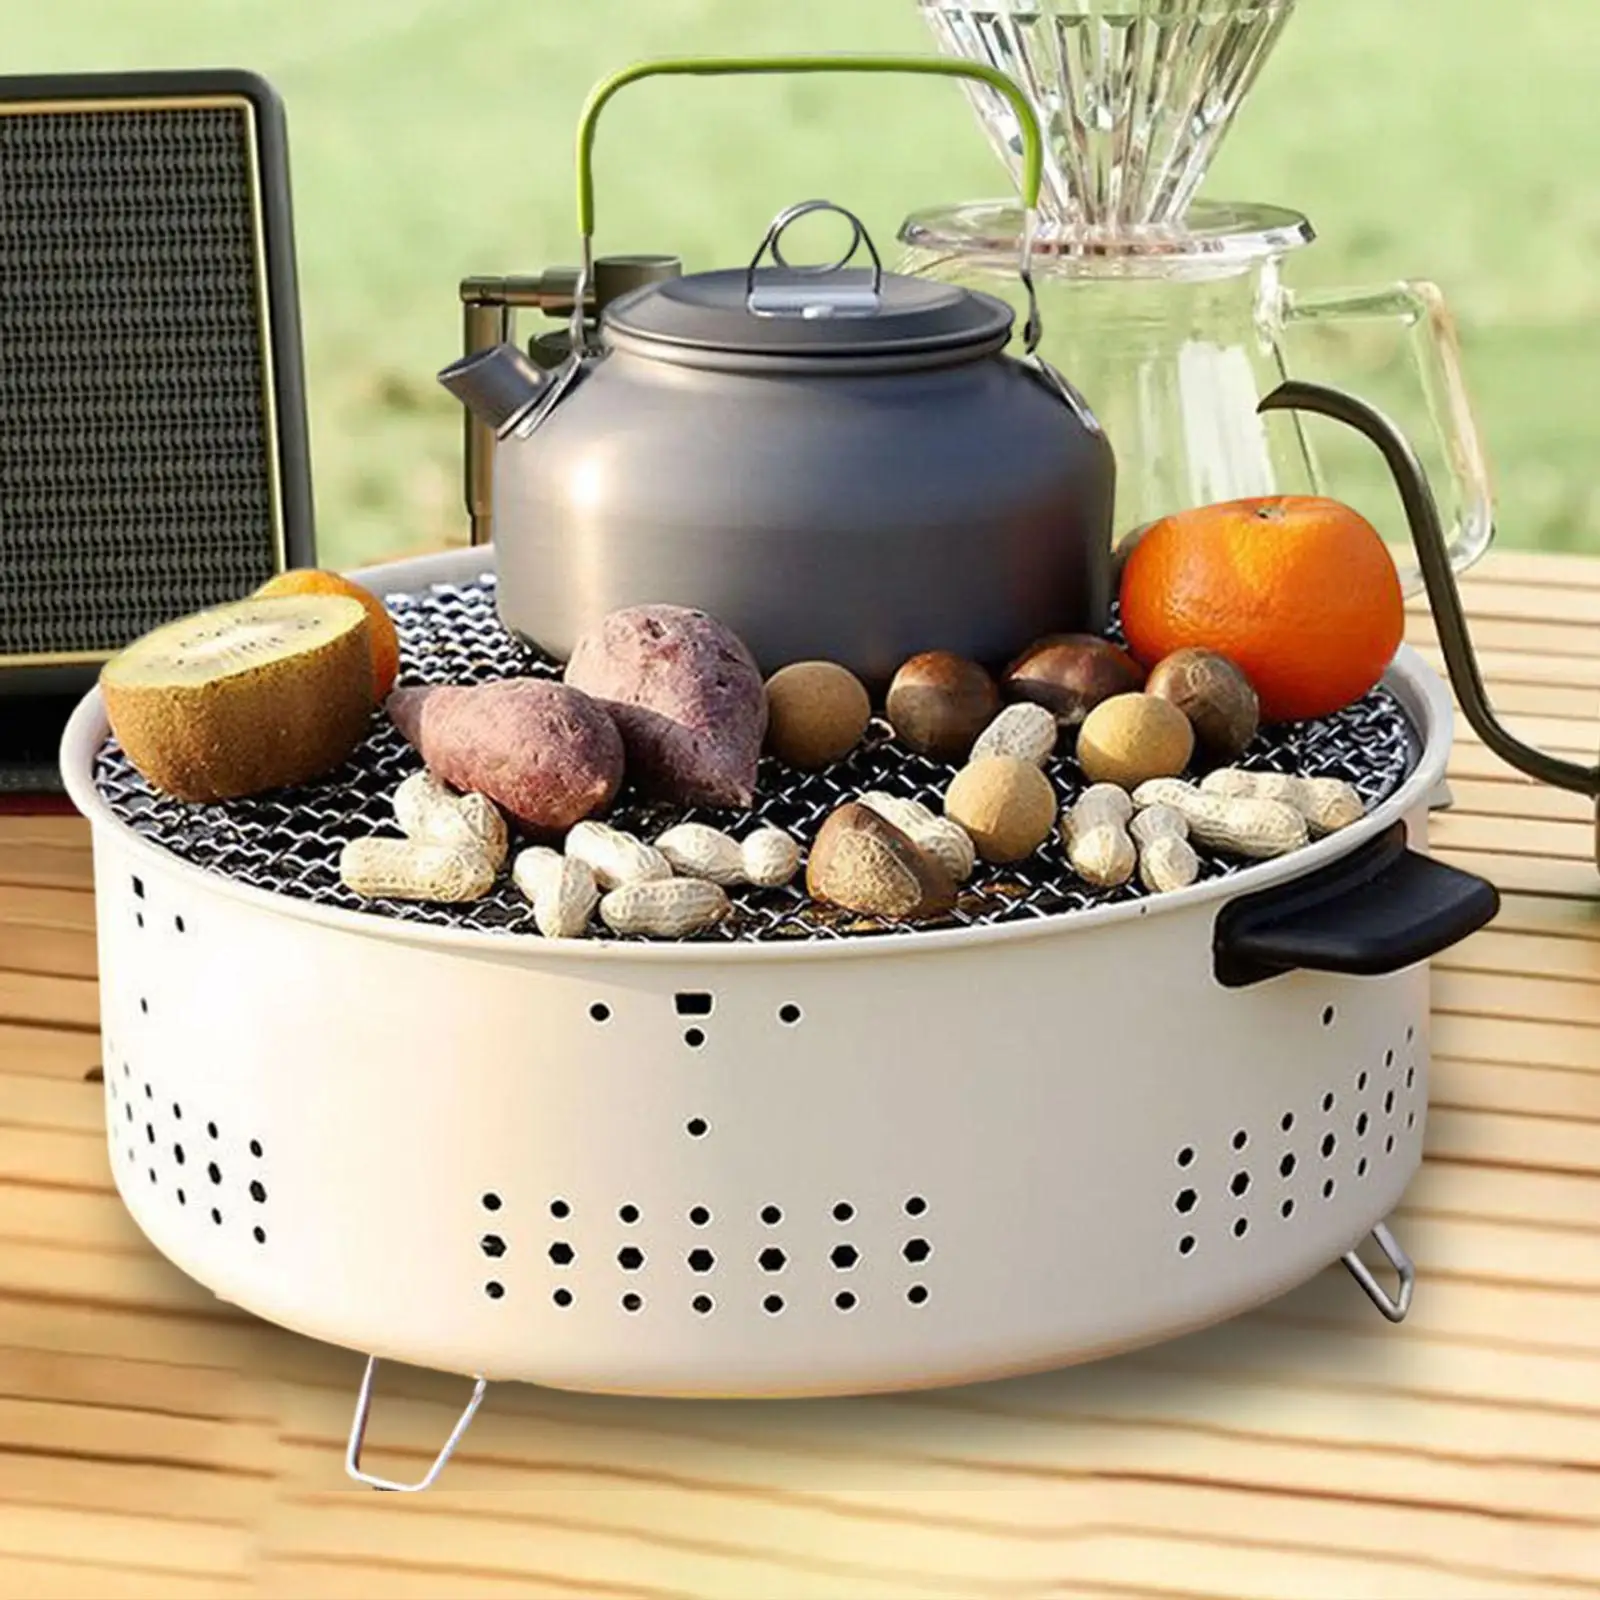 Portable Charcoal Grill Fireplace with Grill Furnace Barbecue Stove for Patio Picnic Camping Hiking Outdoor Indoor Fire Pits